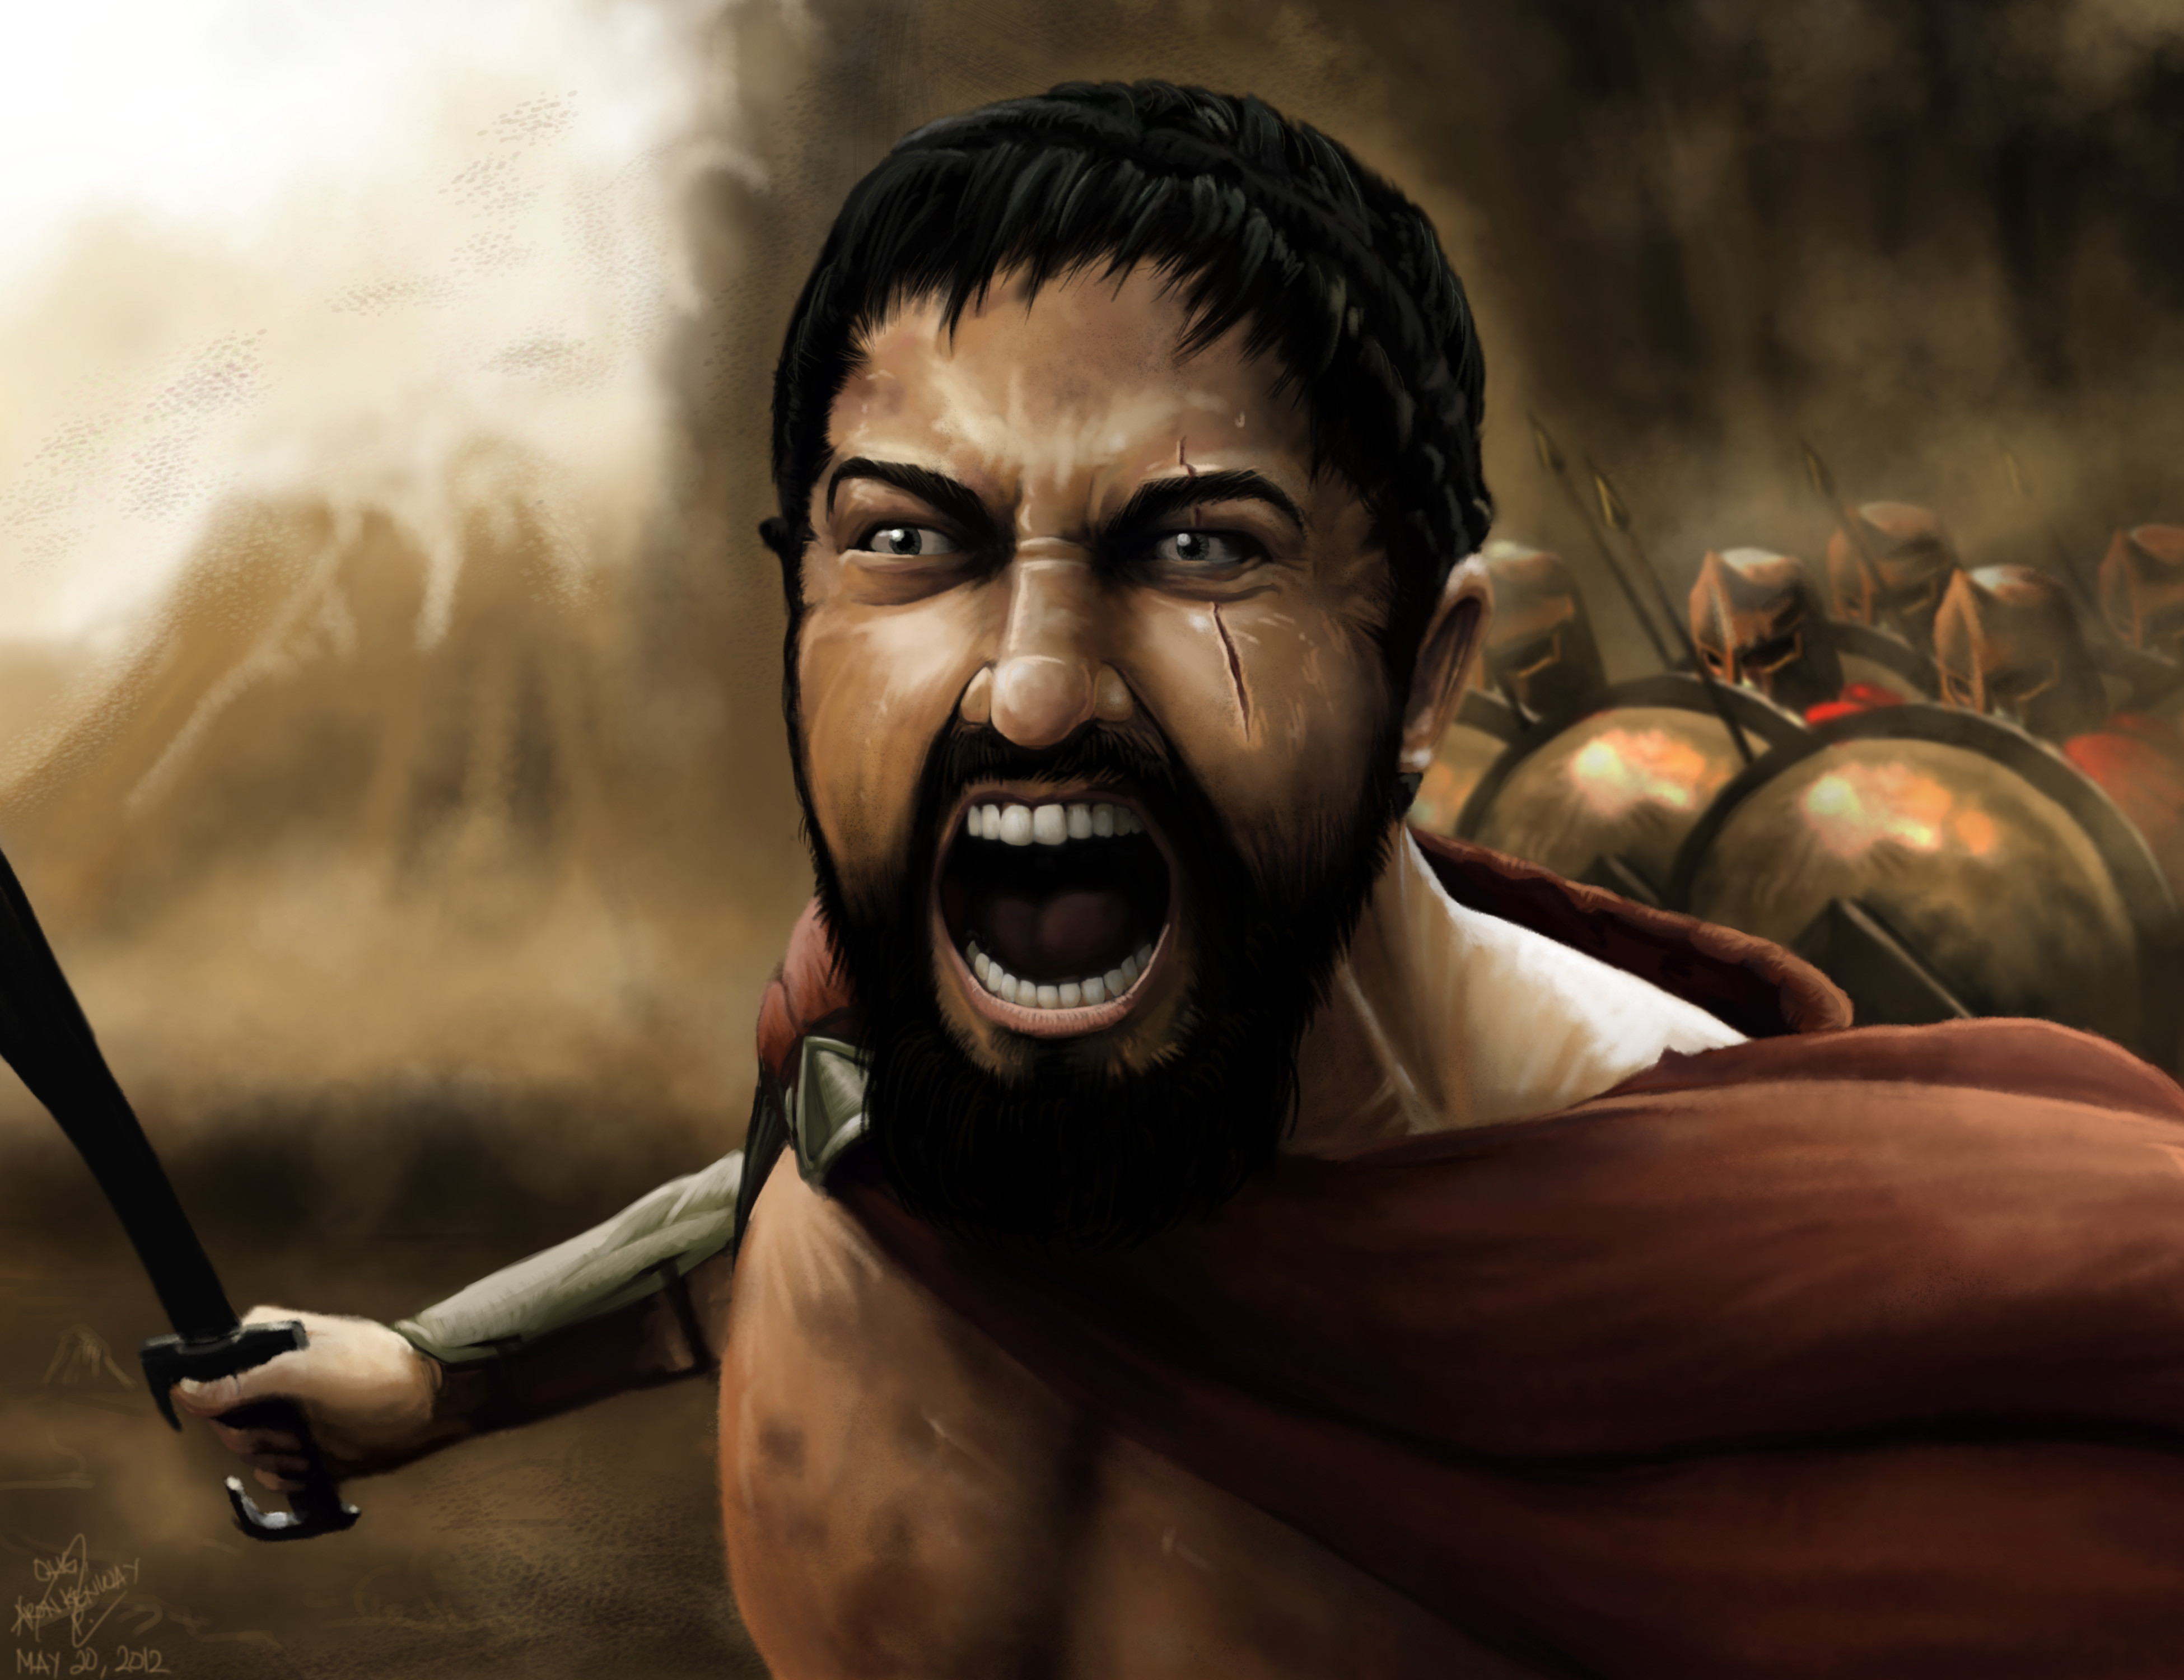 Quotes By Leonidas From 300. QuotesGram